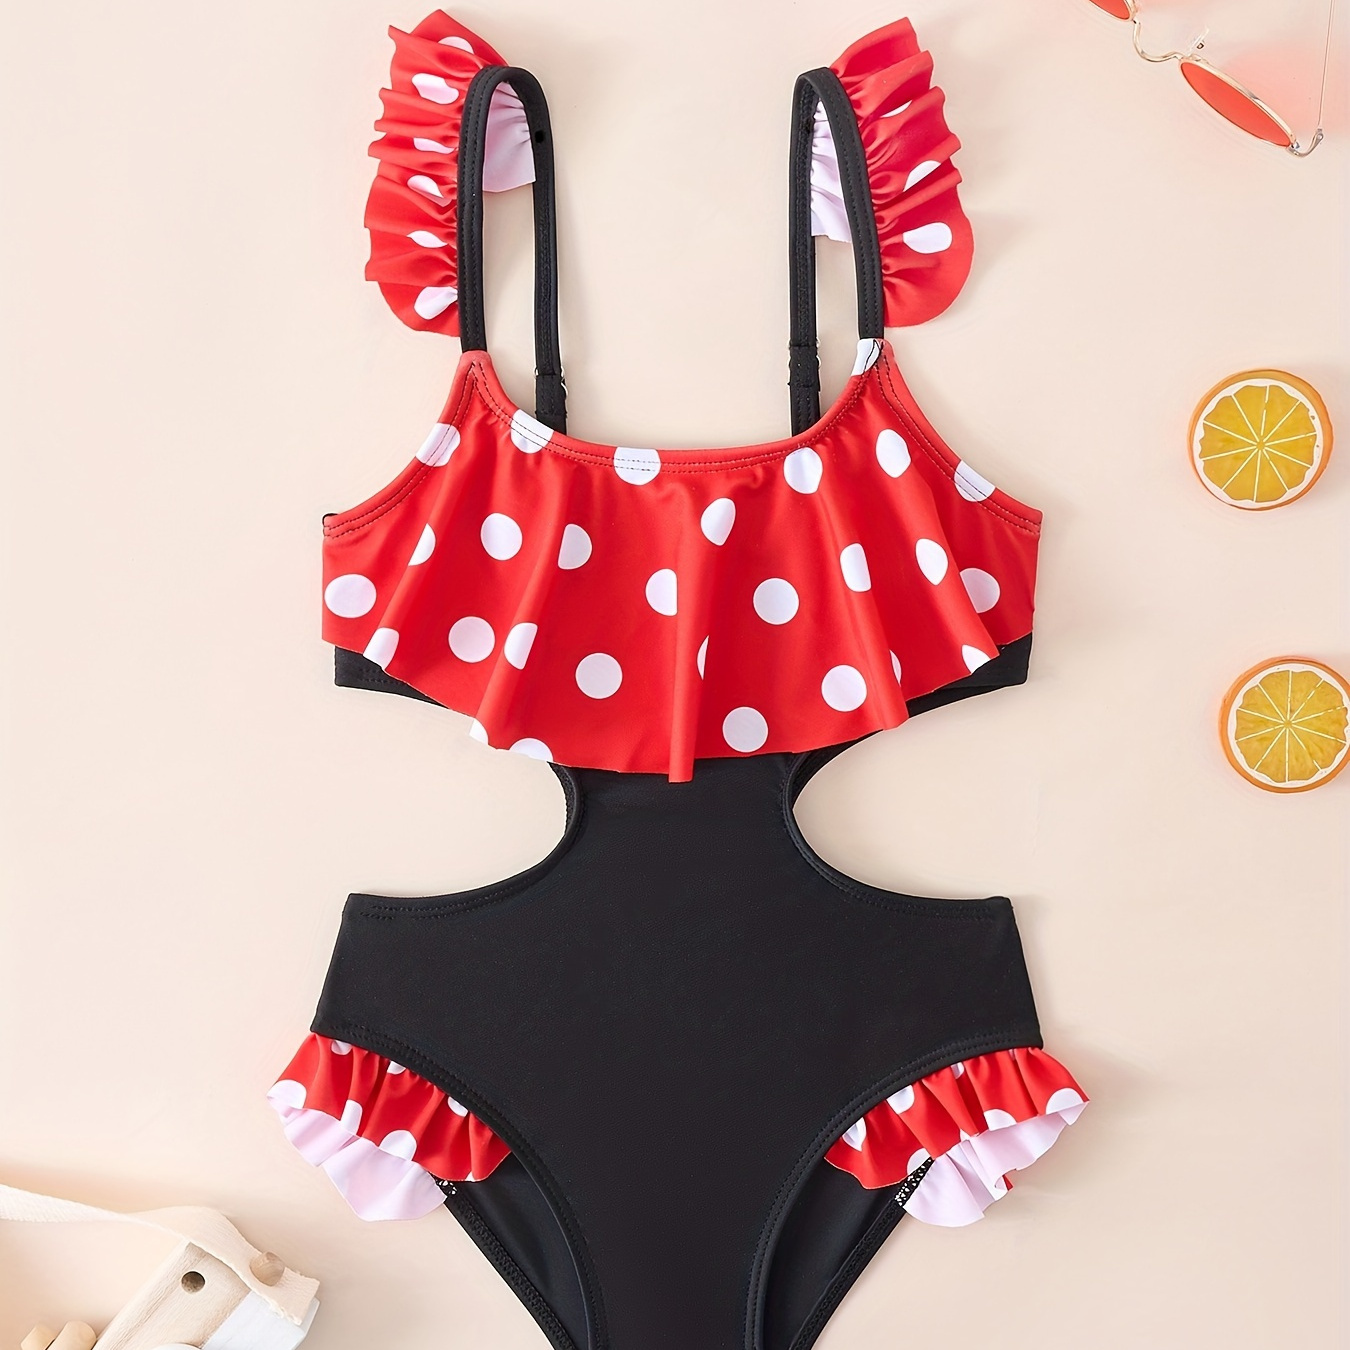 

Girls 1-piece Swimsuit With Red Polka Dots And Ruffled Edges For Pool Beach Summer